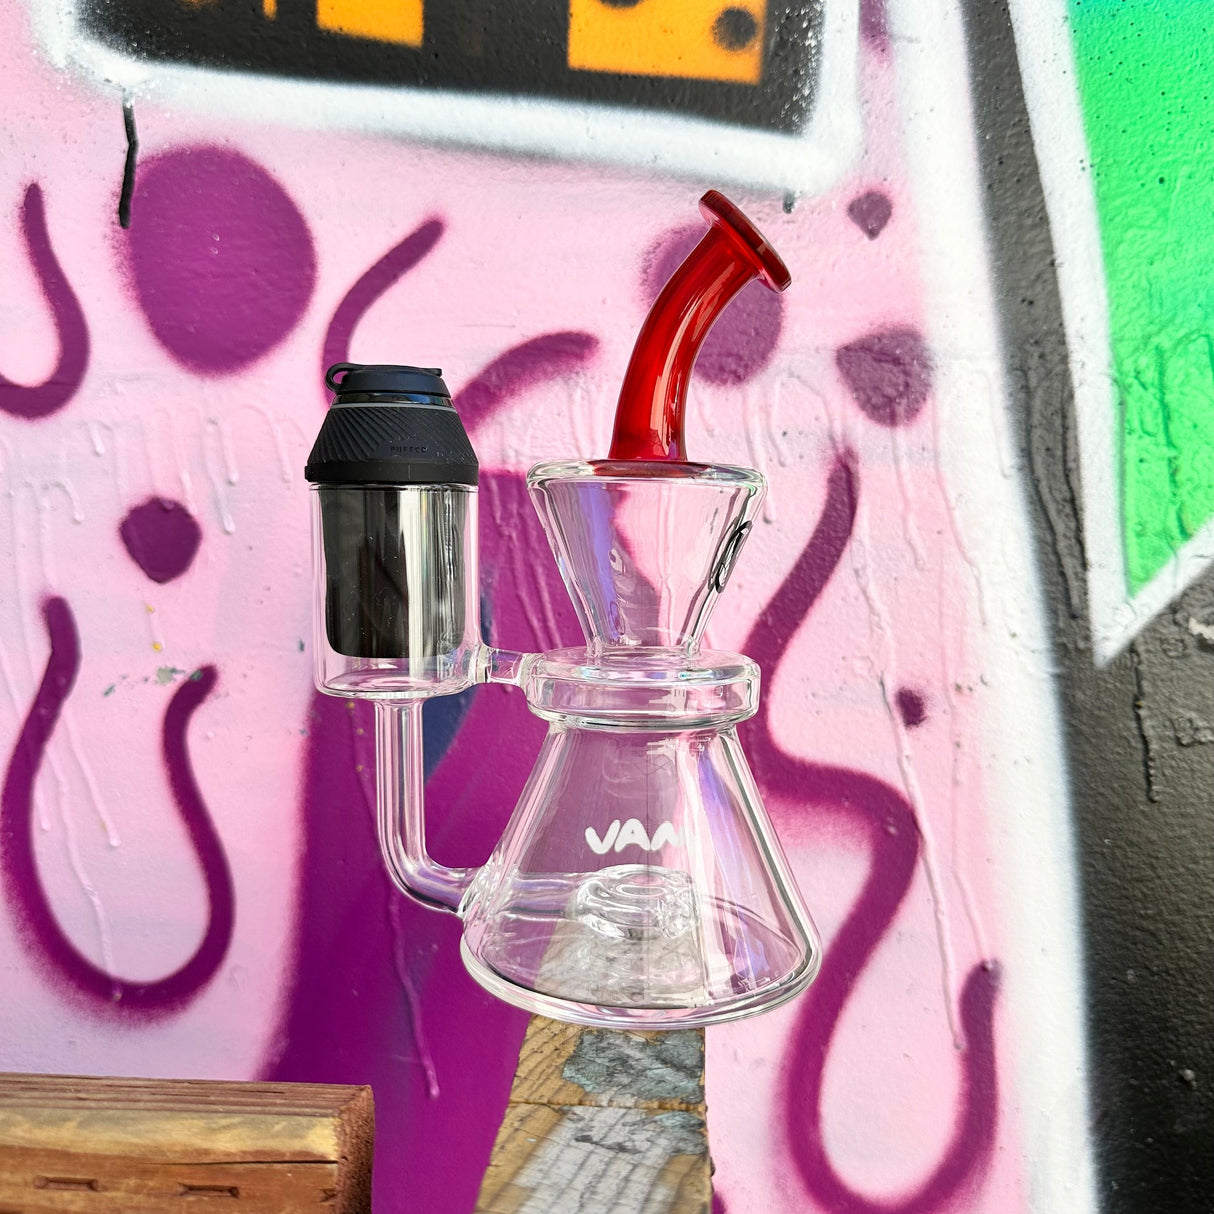 MAV PRO Catalina Proxy Rig in Blood Red Over Icy White Satin, angled view against graffiti wall